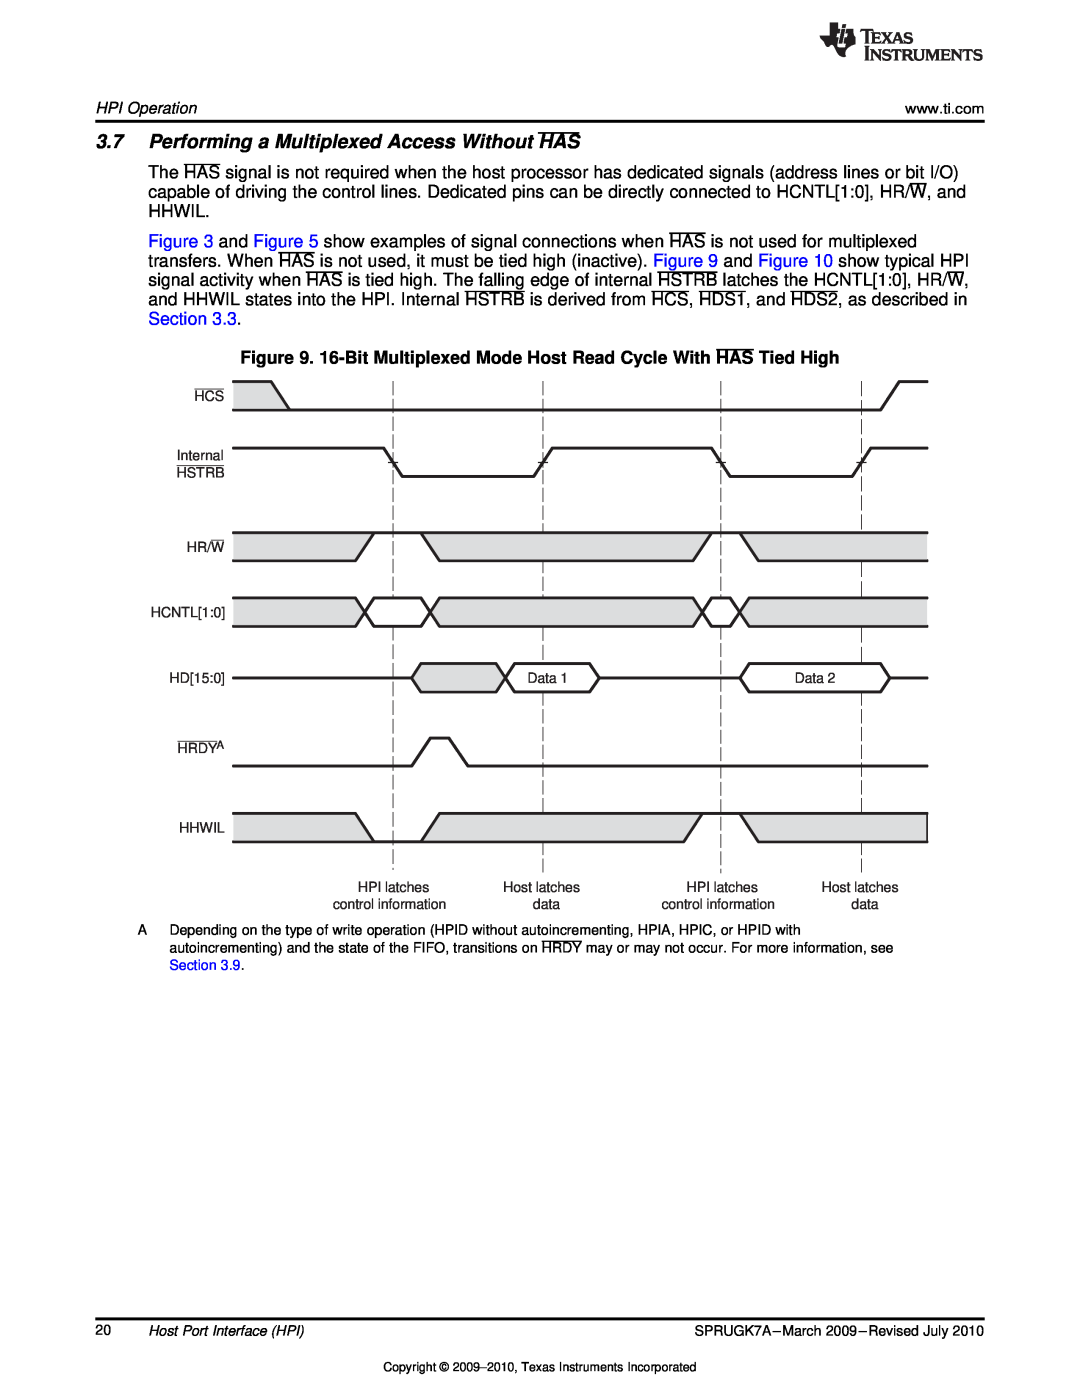 Texas Instruments TMS320C6457 manual Performing a Multiplexed Access Without HAS 